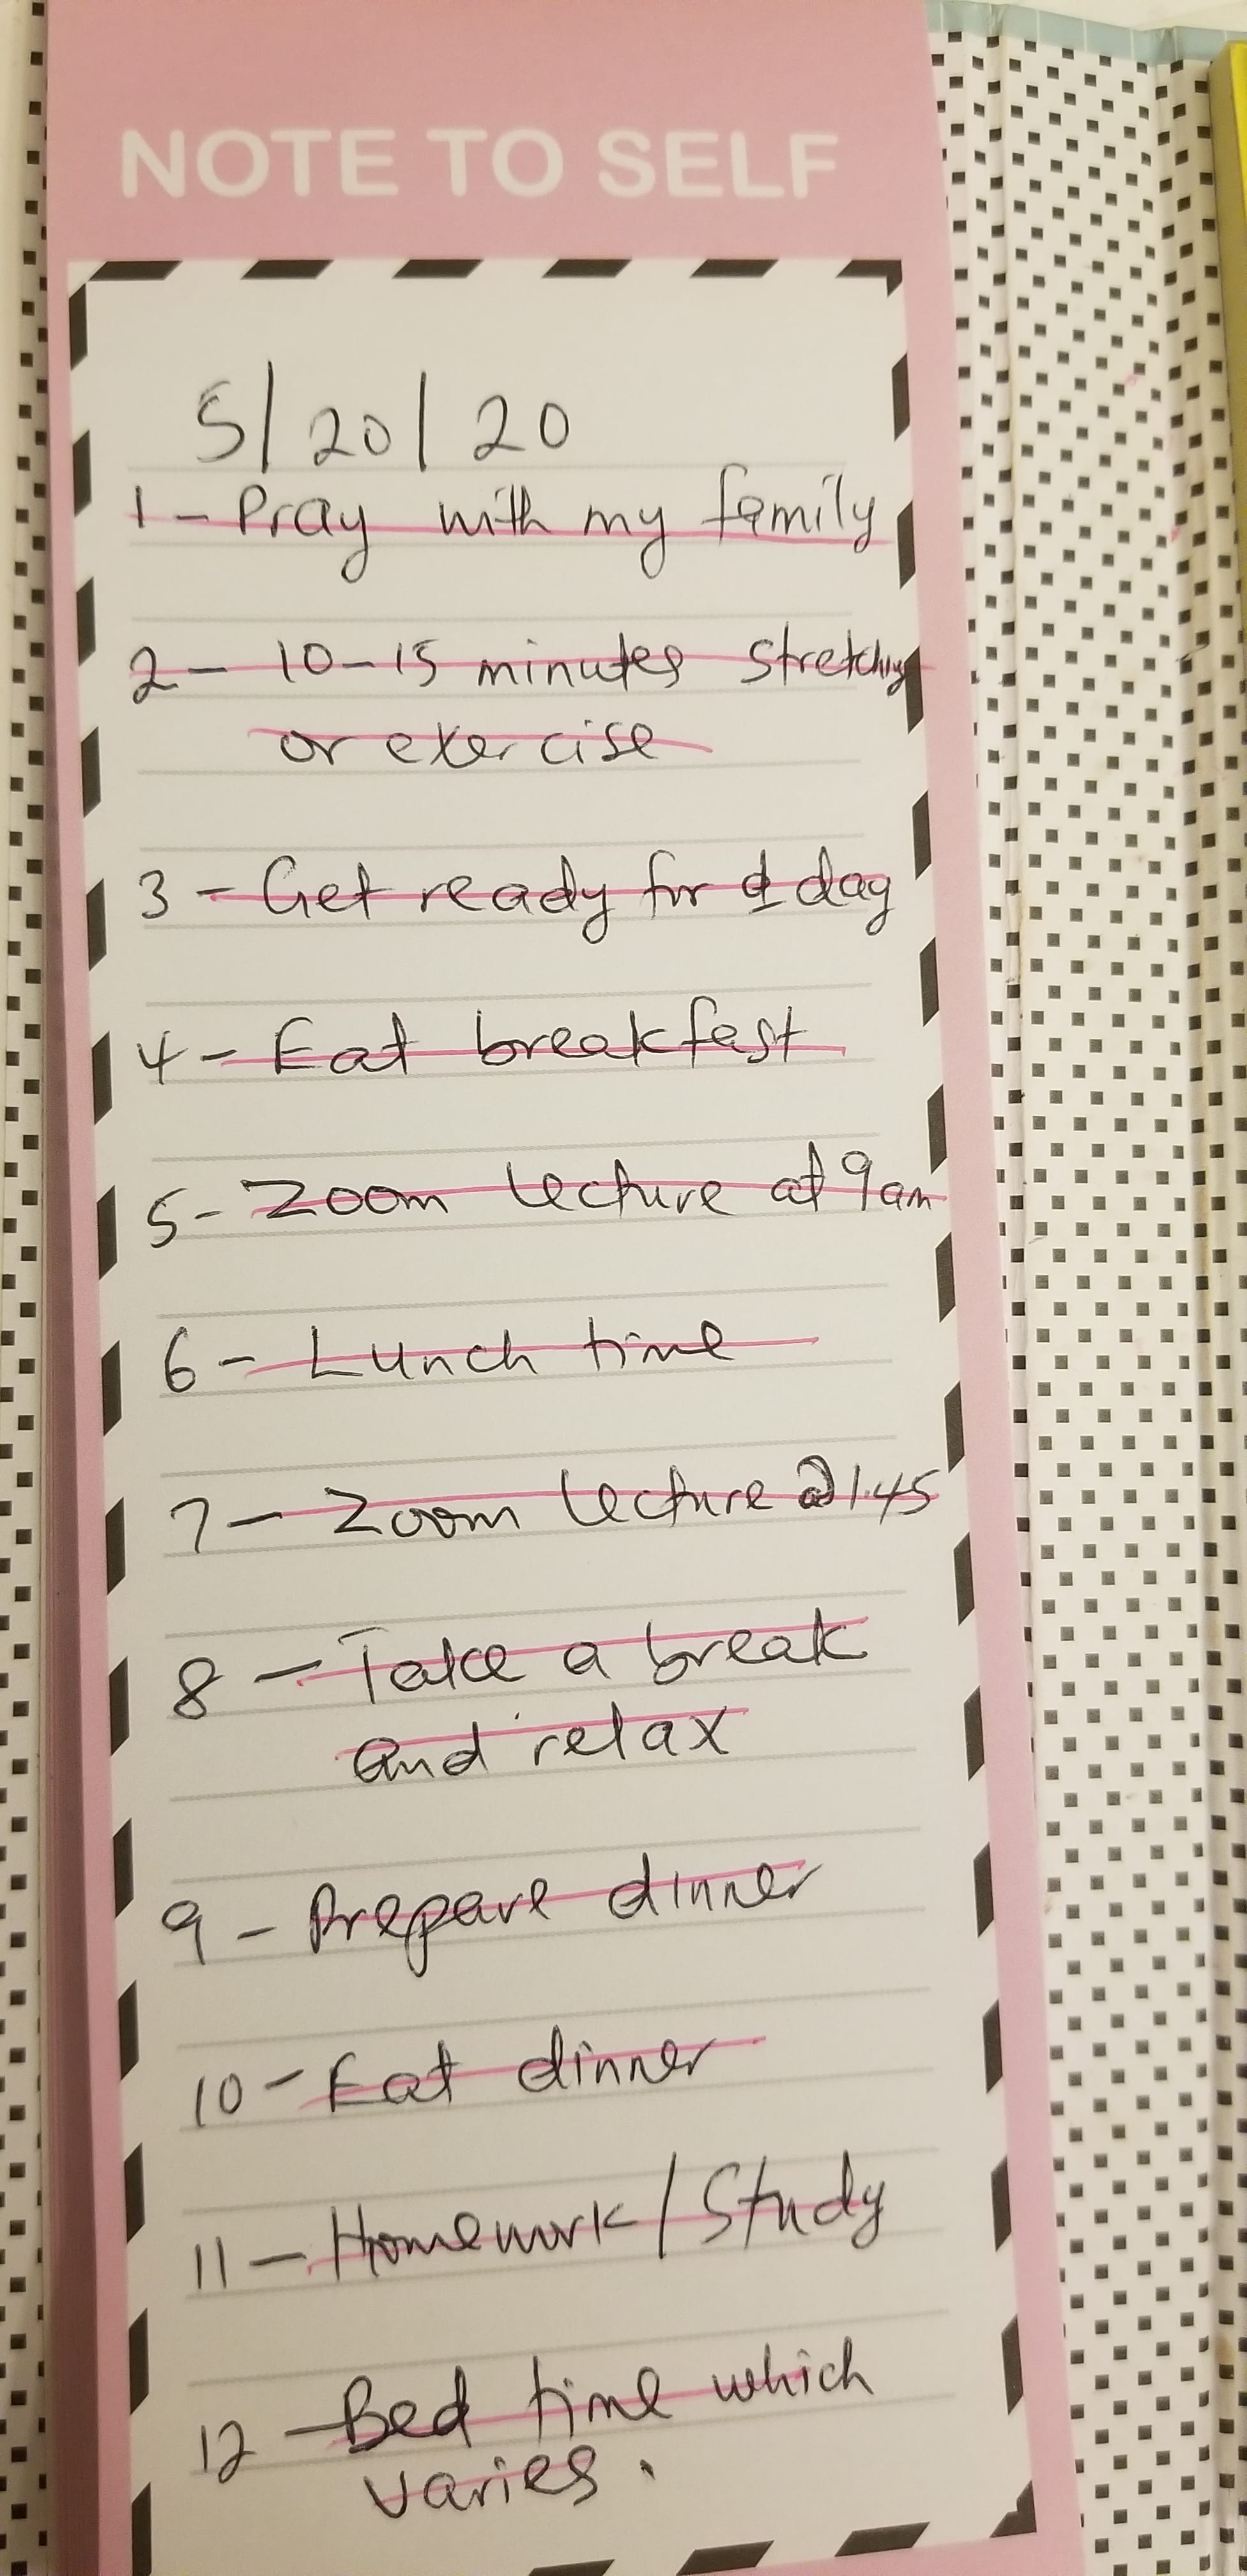 An image of a 12 item to-do list for May 20, 2020, with each item crossed out. 